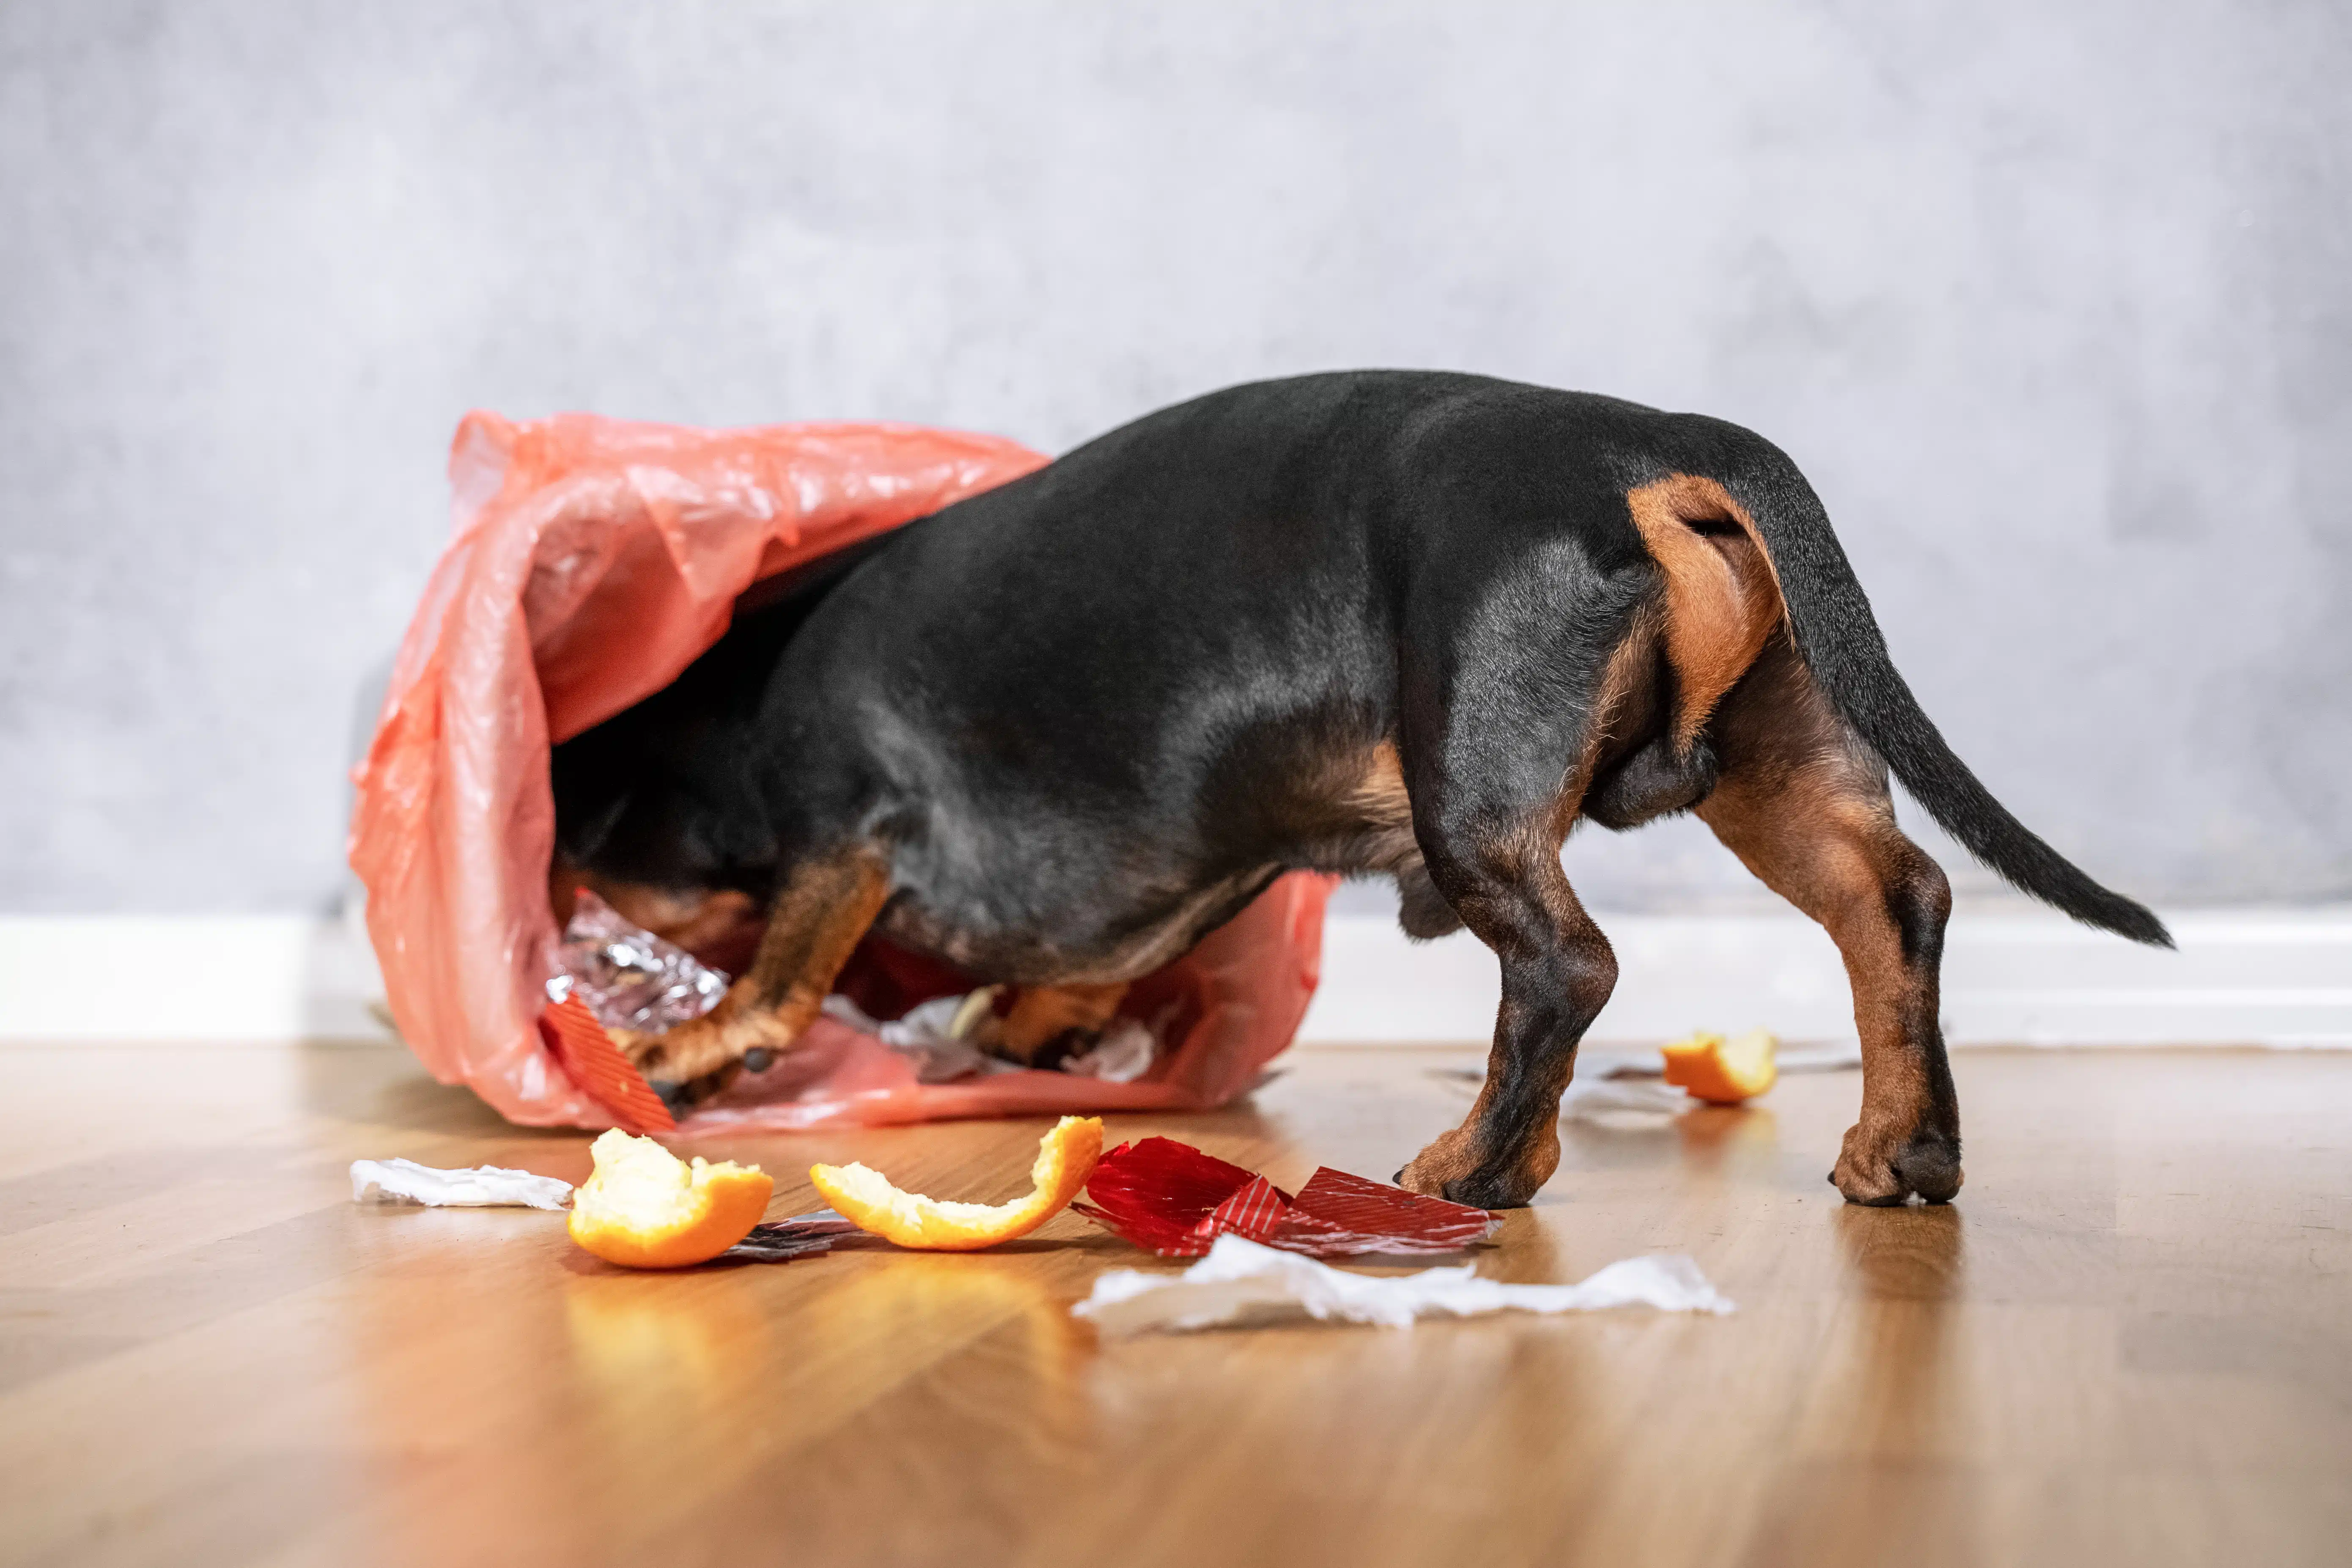 Dachshund dog getting into a pushed over garbage can on hardwood floors